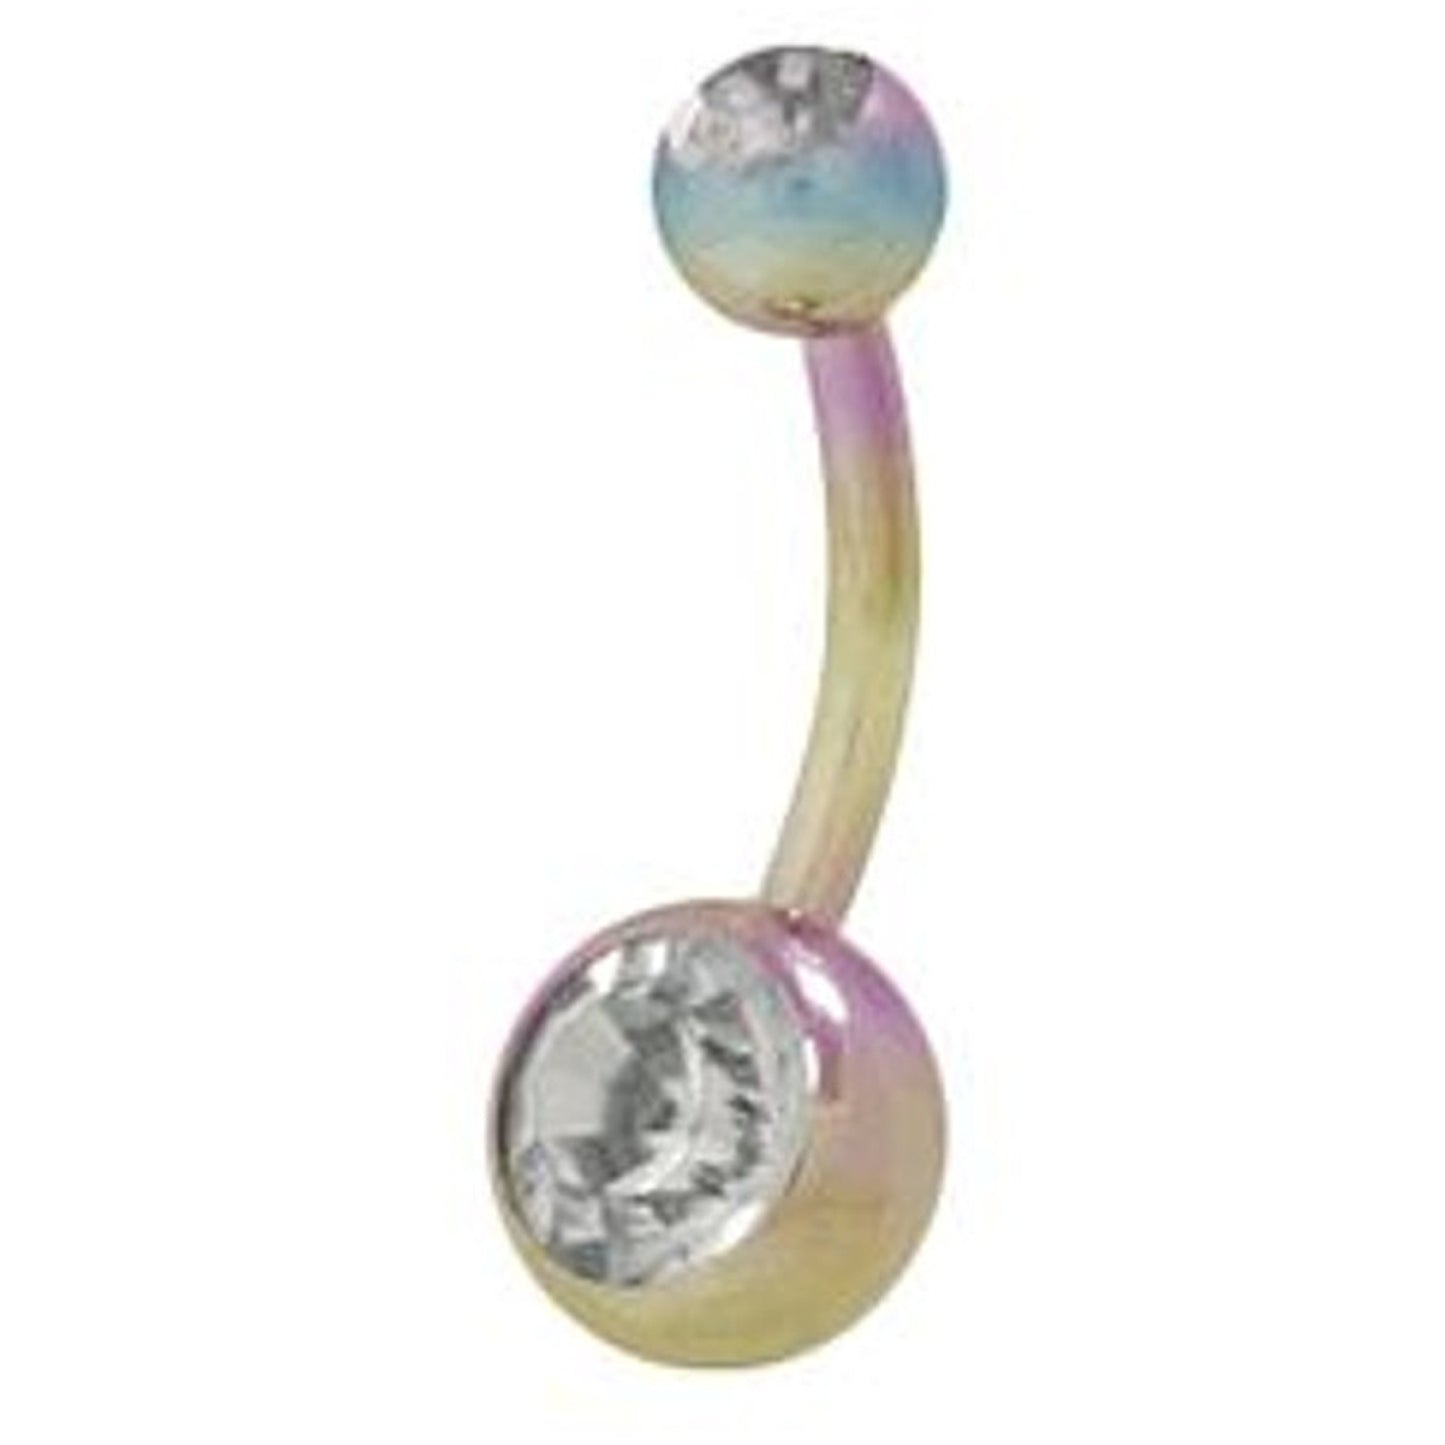 Titanium Belly Ring 14 Gauge 7/16" (11MM) With Double Jeweled Gems